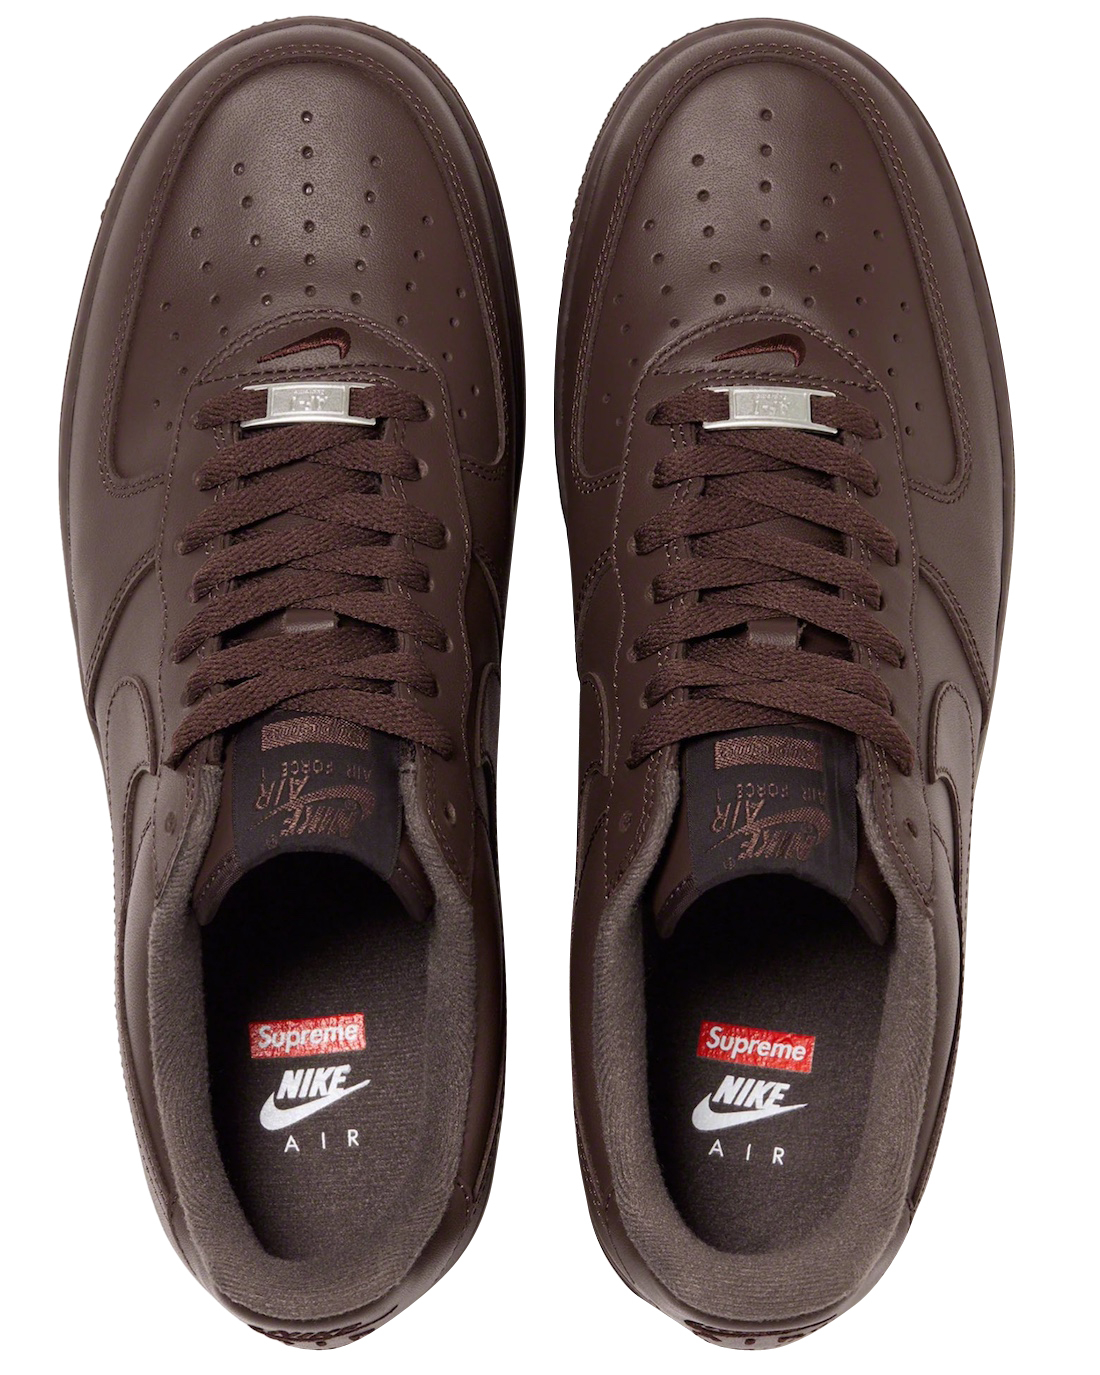 BUY Supreme X Nike Air Force 1 Low Baroque Brown | Kixify Marketplace